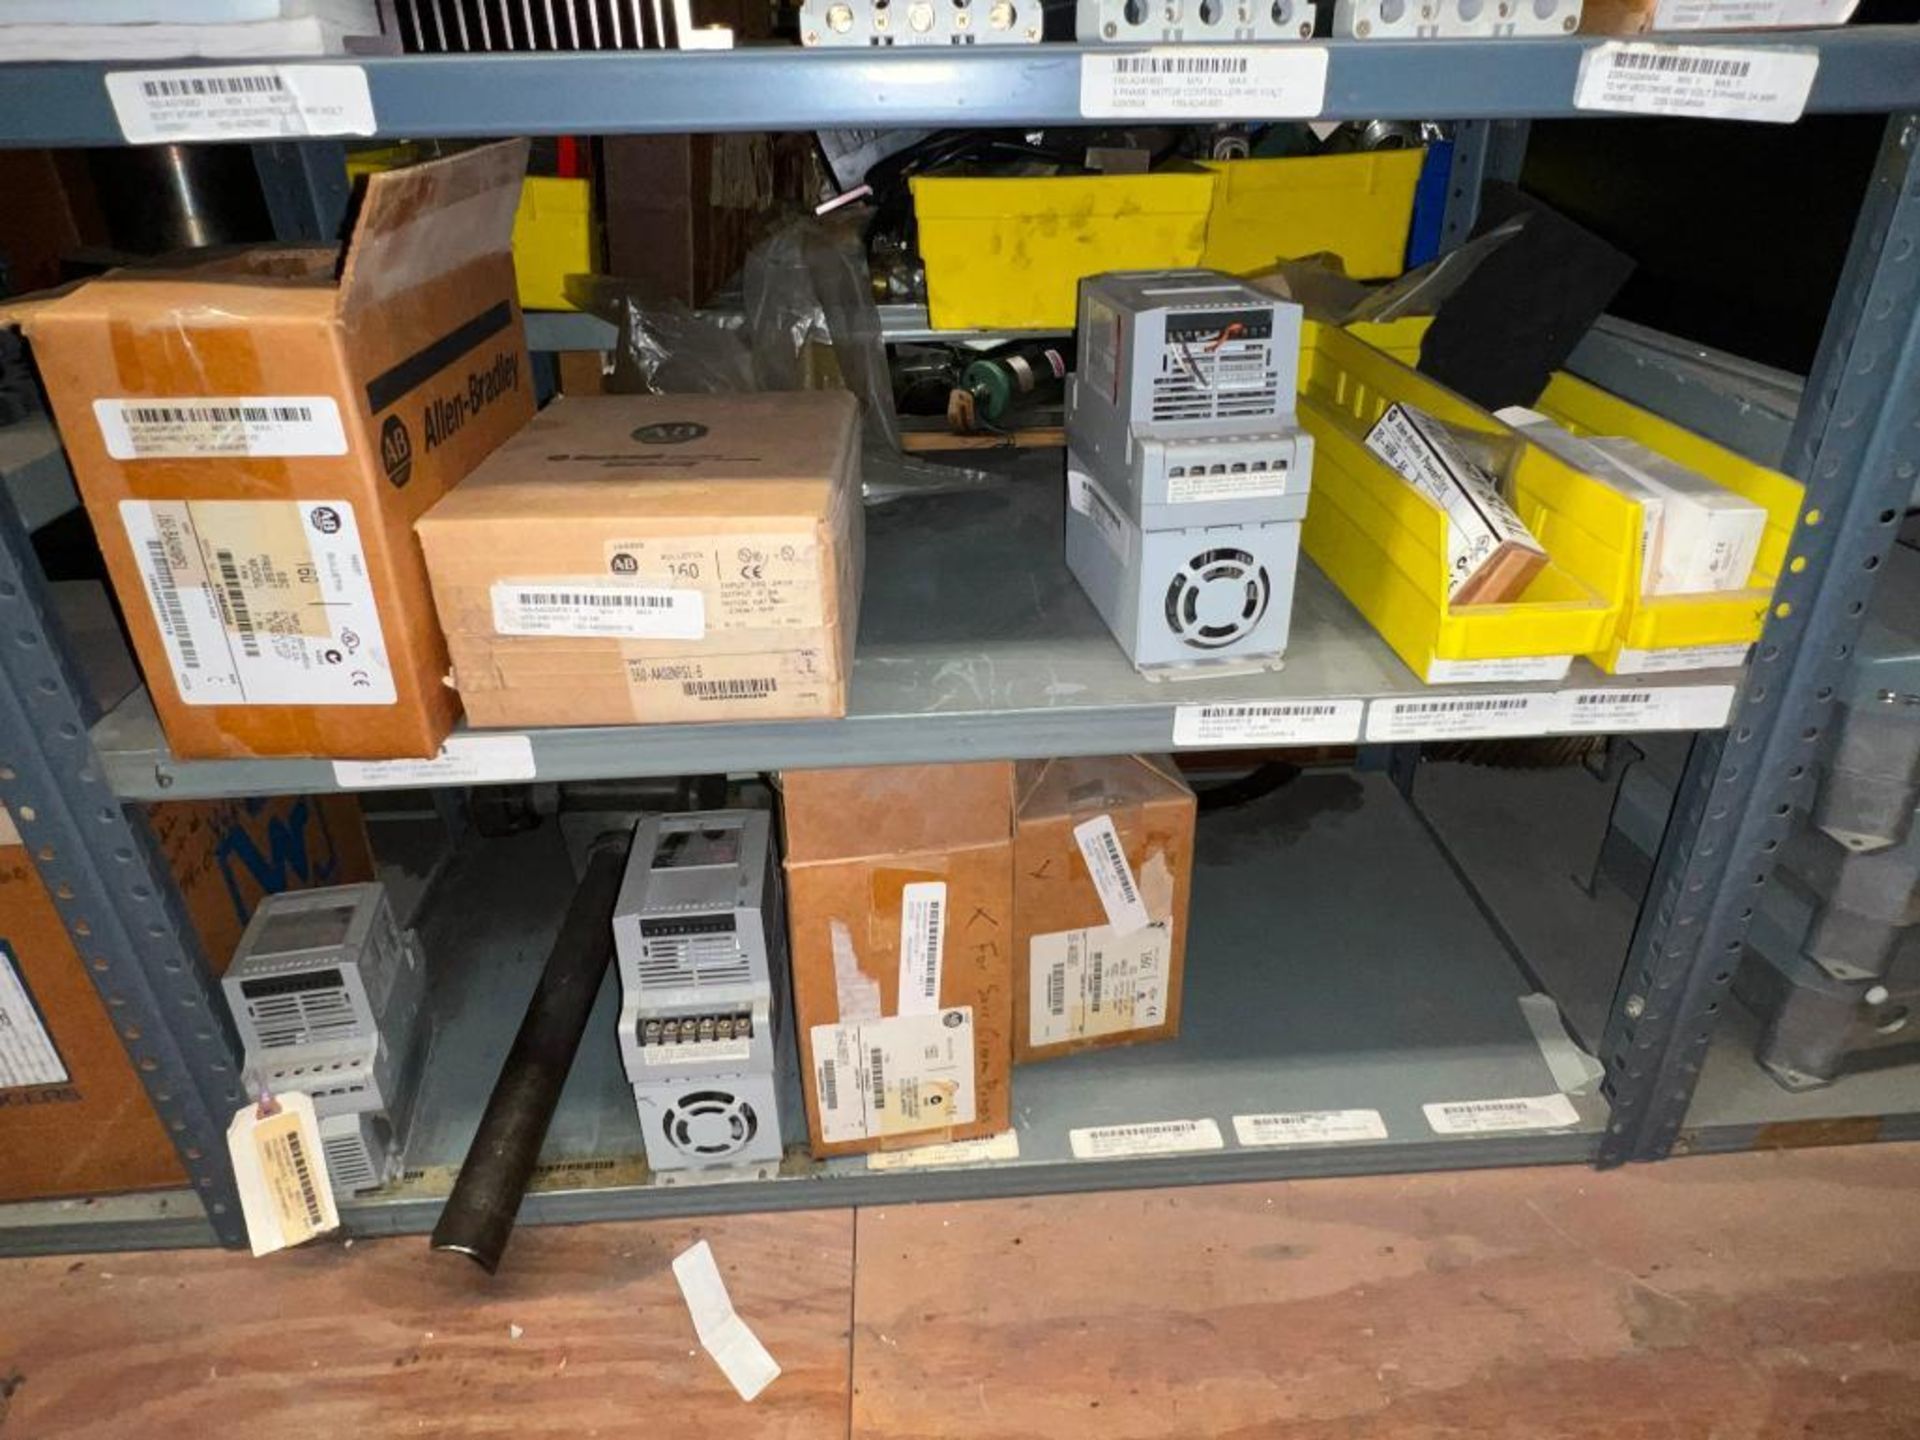 Assorted Allen-Bradley Variable-Frequency Drives Including PowerFlex 70 and 1305s, Safety Switches - Image 4 of 7